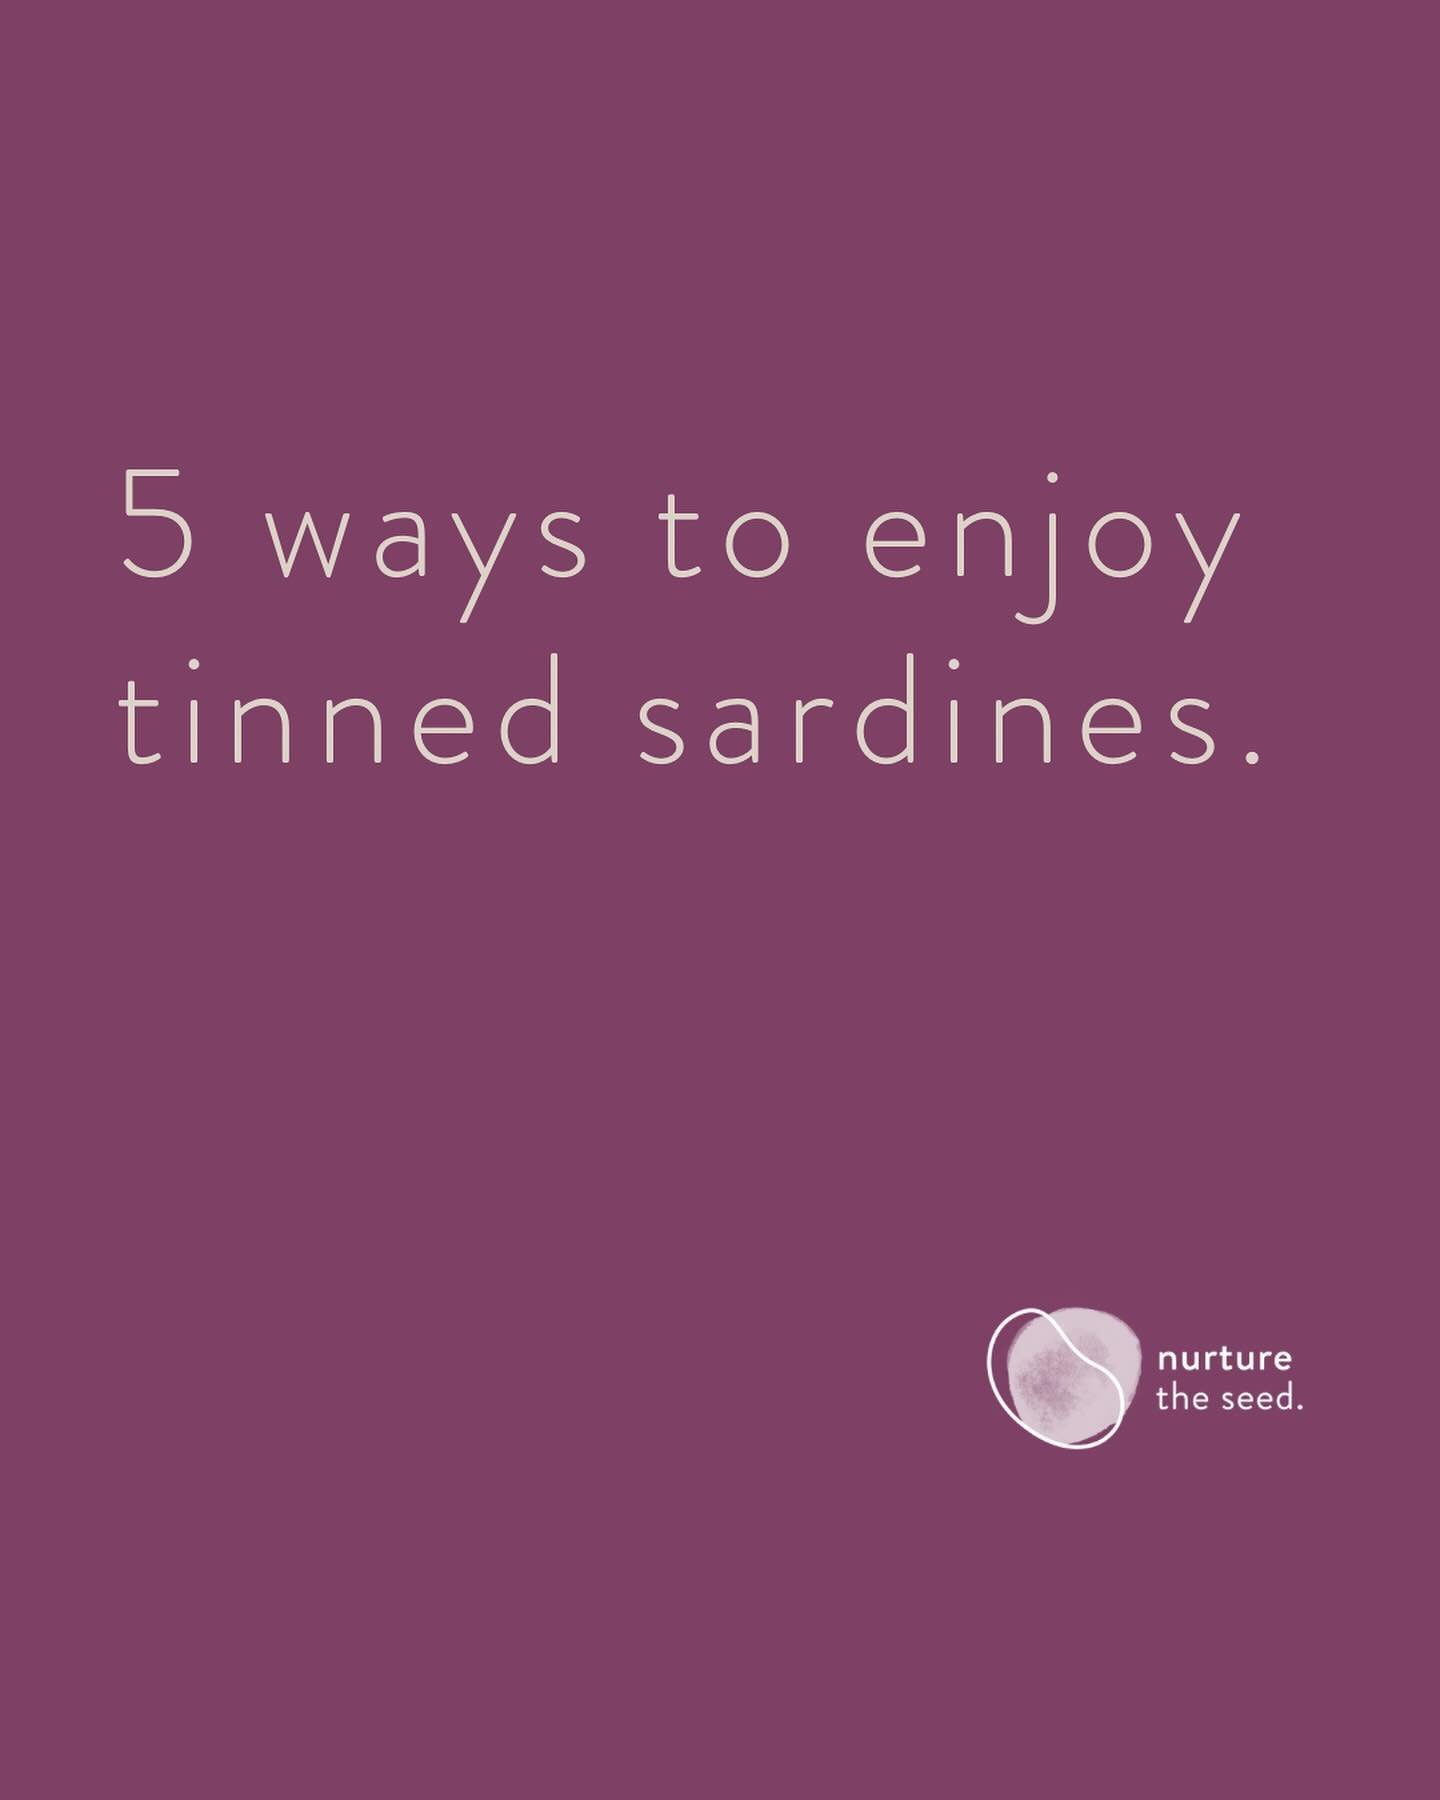 If you&rsquo;re anything like me, you really want to eat sardines because they are so nutritious and they are a more sustainable fish. However, you don&rsquo;t particularly like the taste 🤢

Well, I&rsquo;ve got good news. I&rsquo;ve been working on